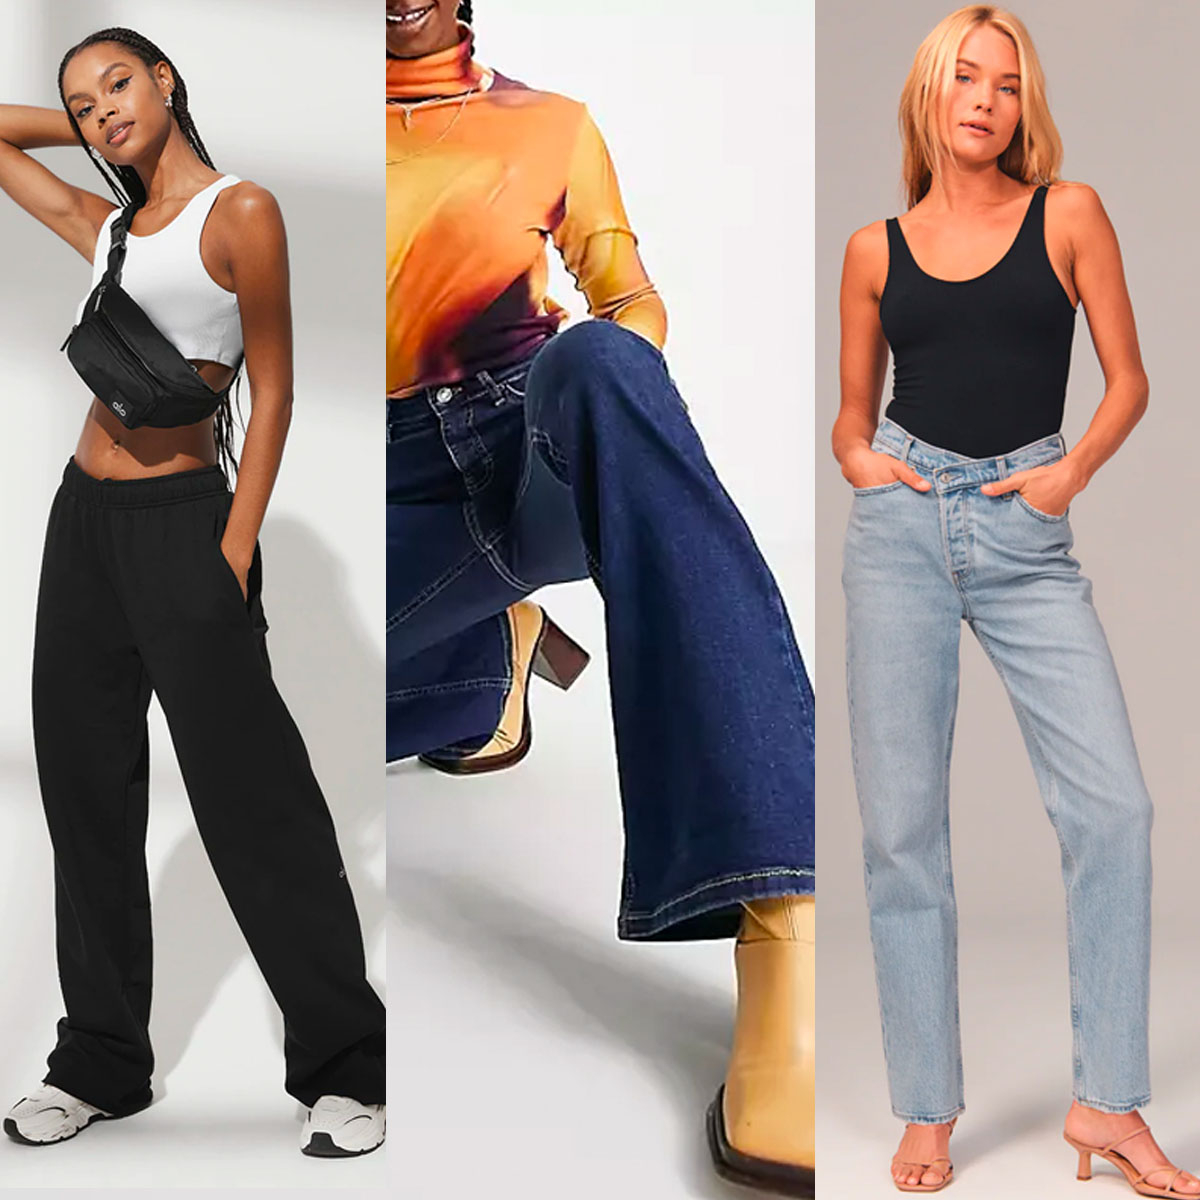 20 Pairs Of Pants For People With Long Legs